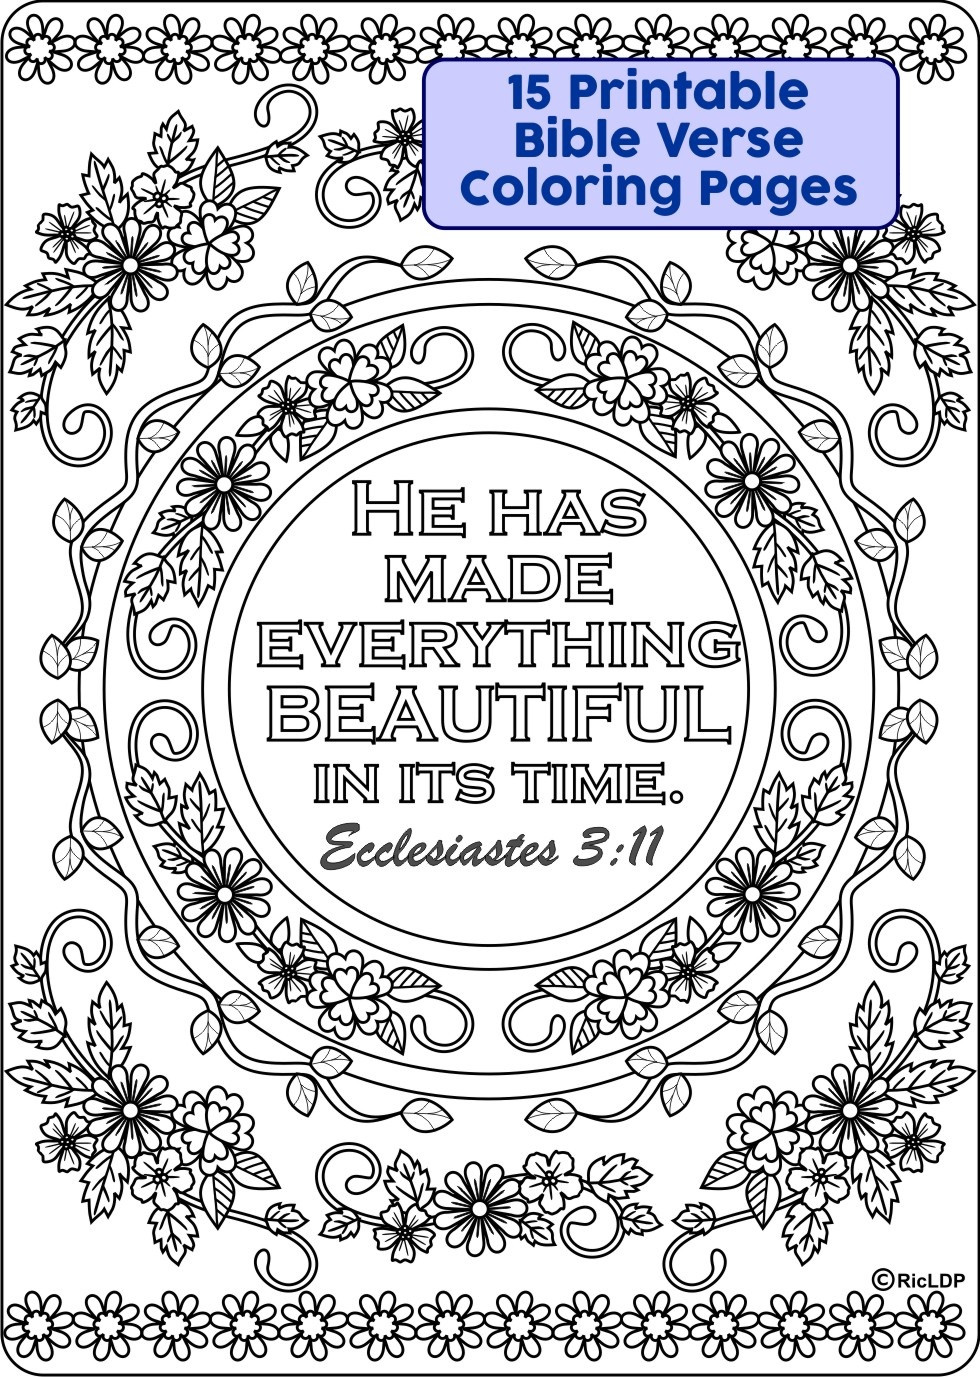 Free Printable Bible Verse Coloring Pages
 15 Printable Bible Verse Coloring Pages